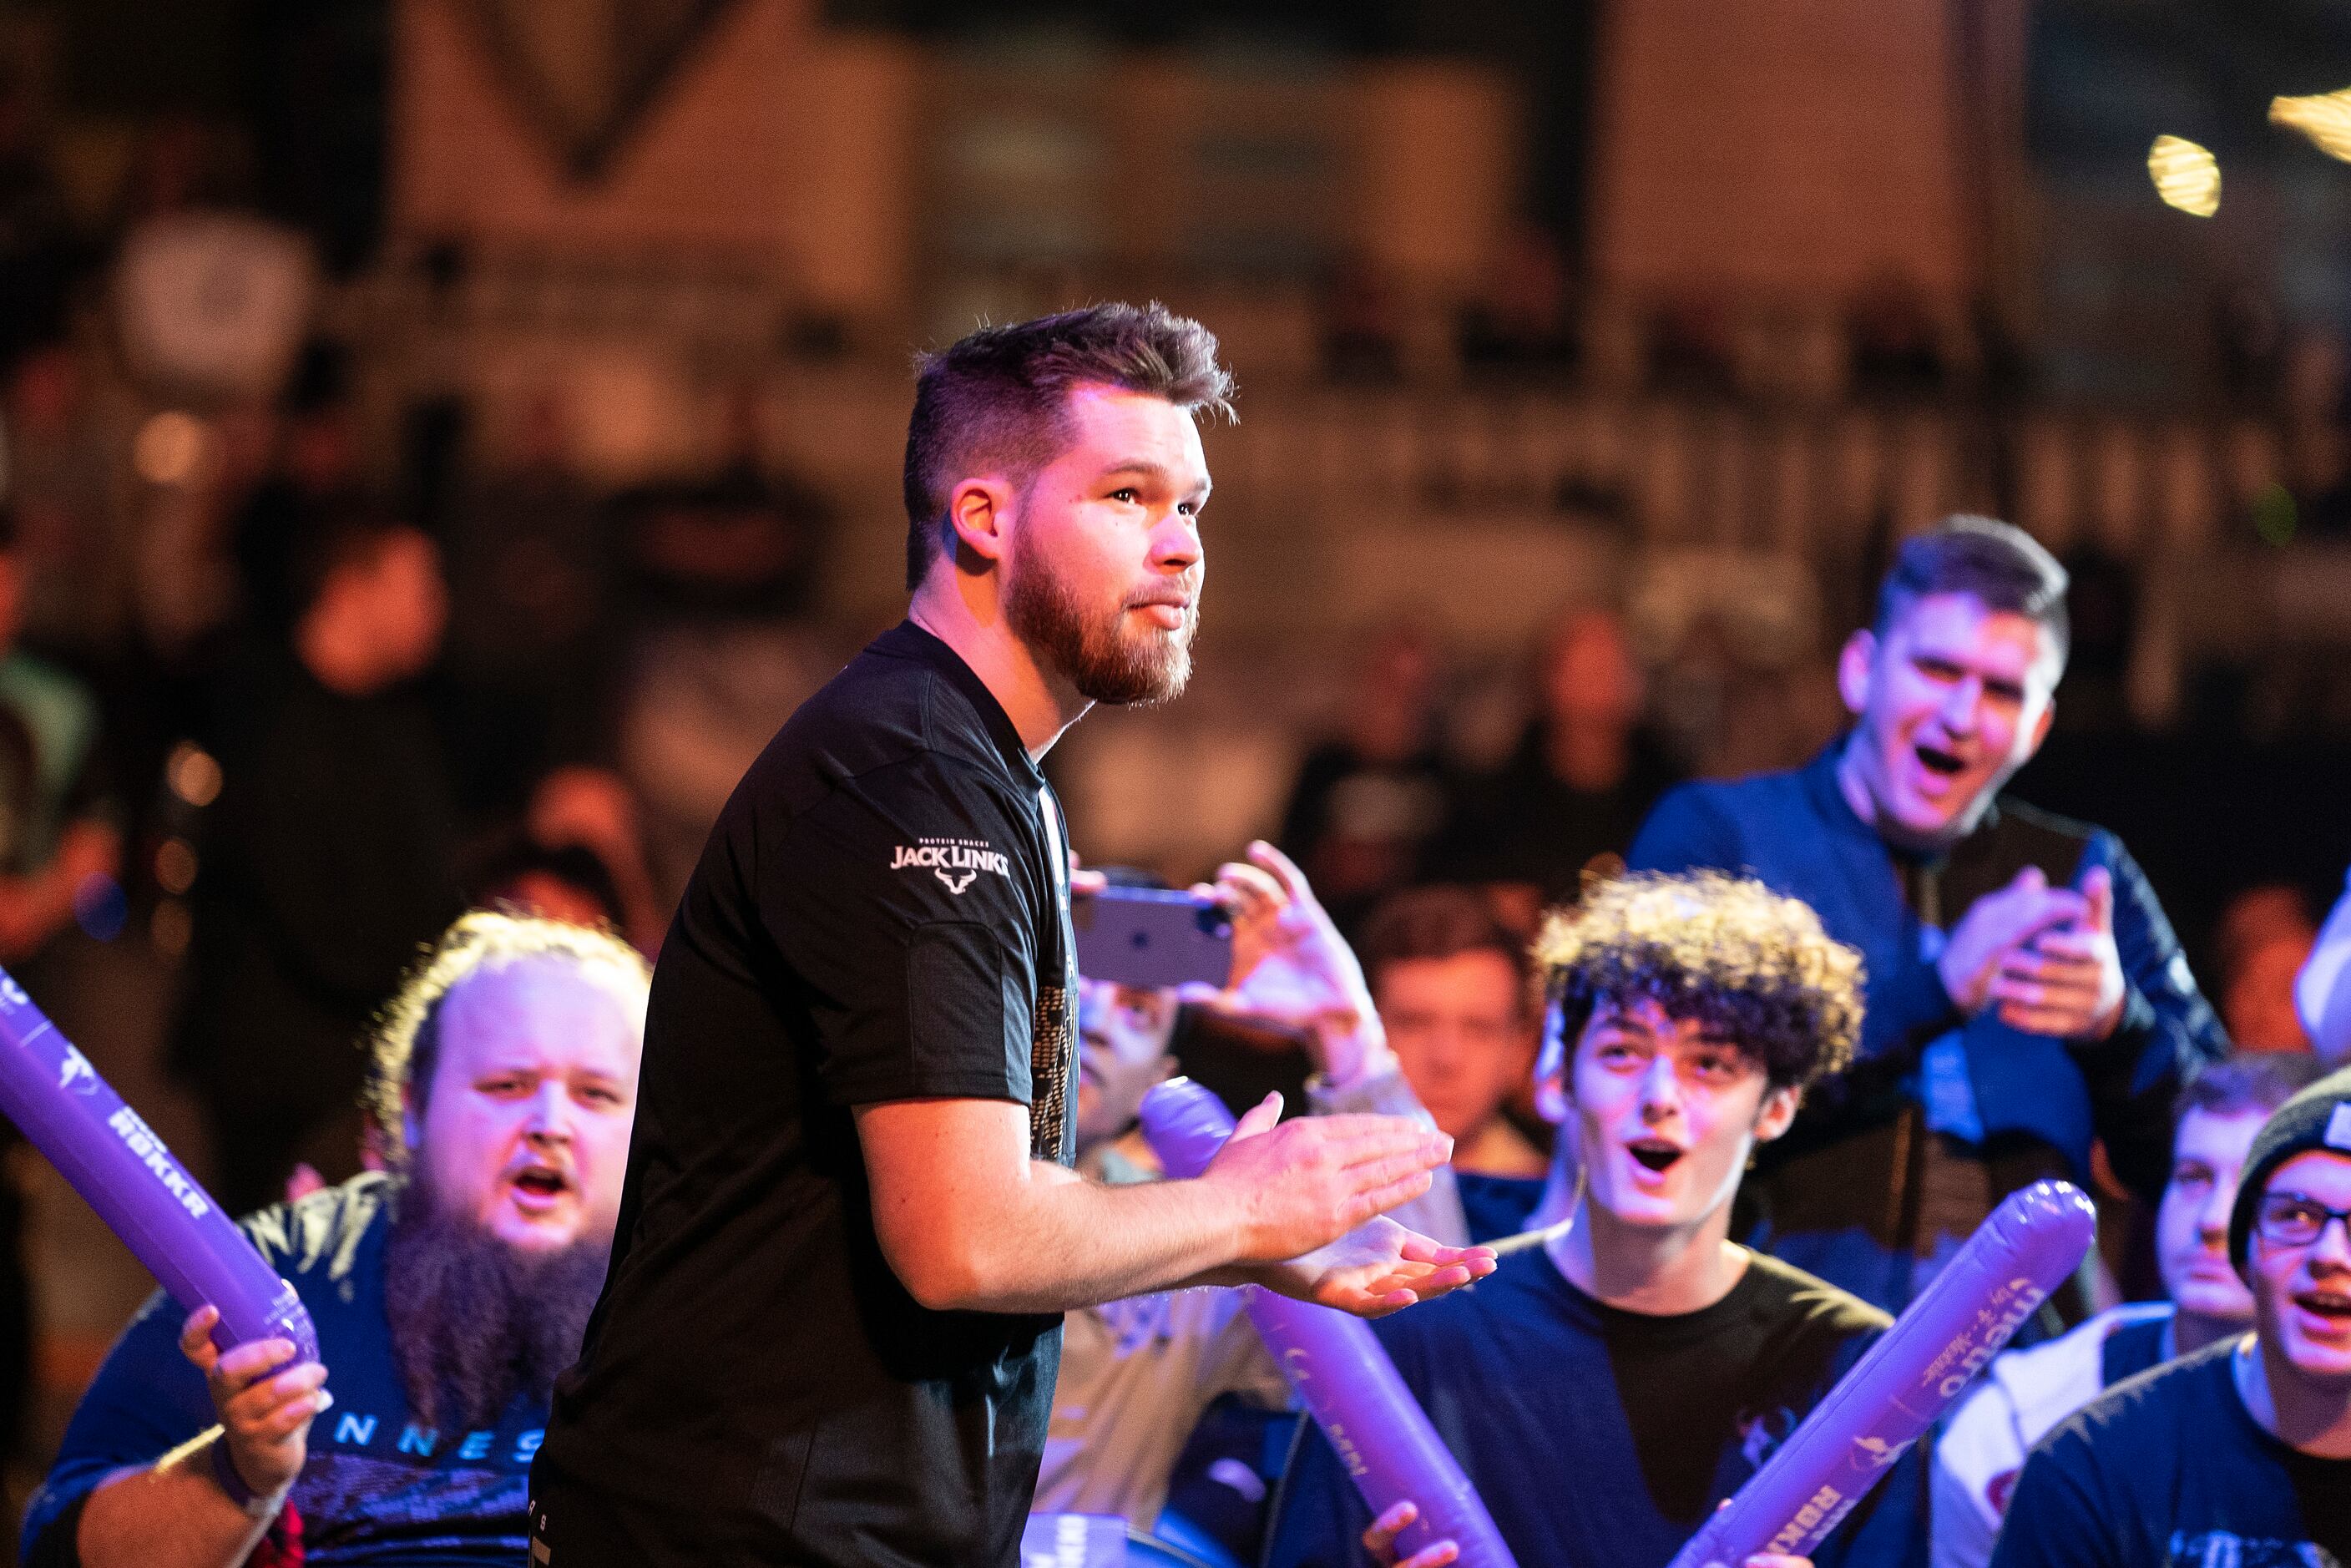 Fans cheer for Crimsix (Ian Porter) as he takes the stage before Dallas Empire competes...